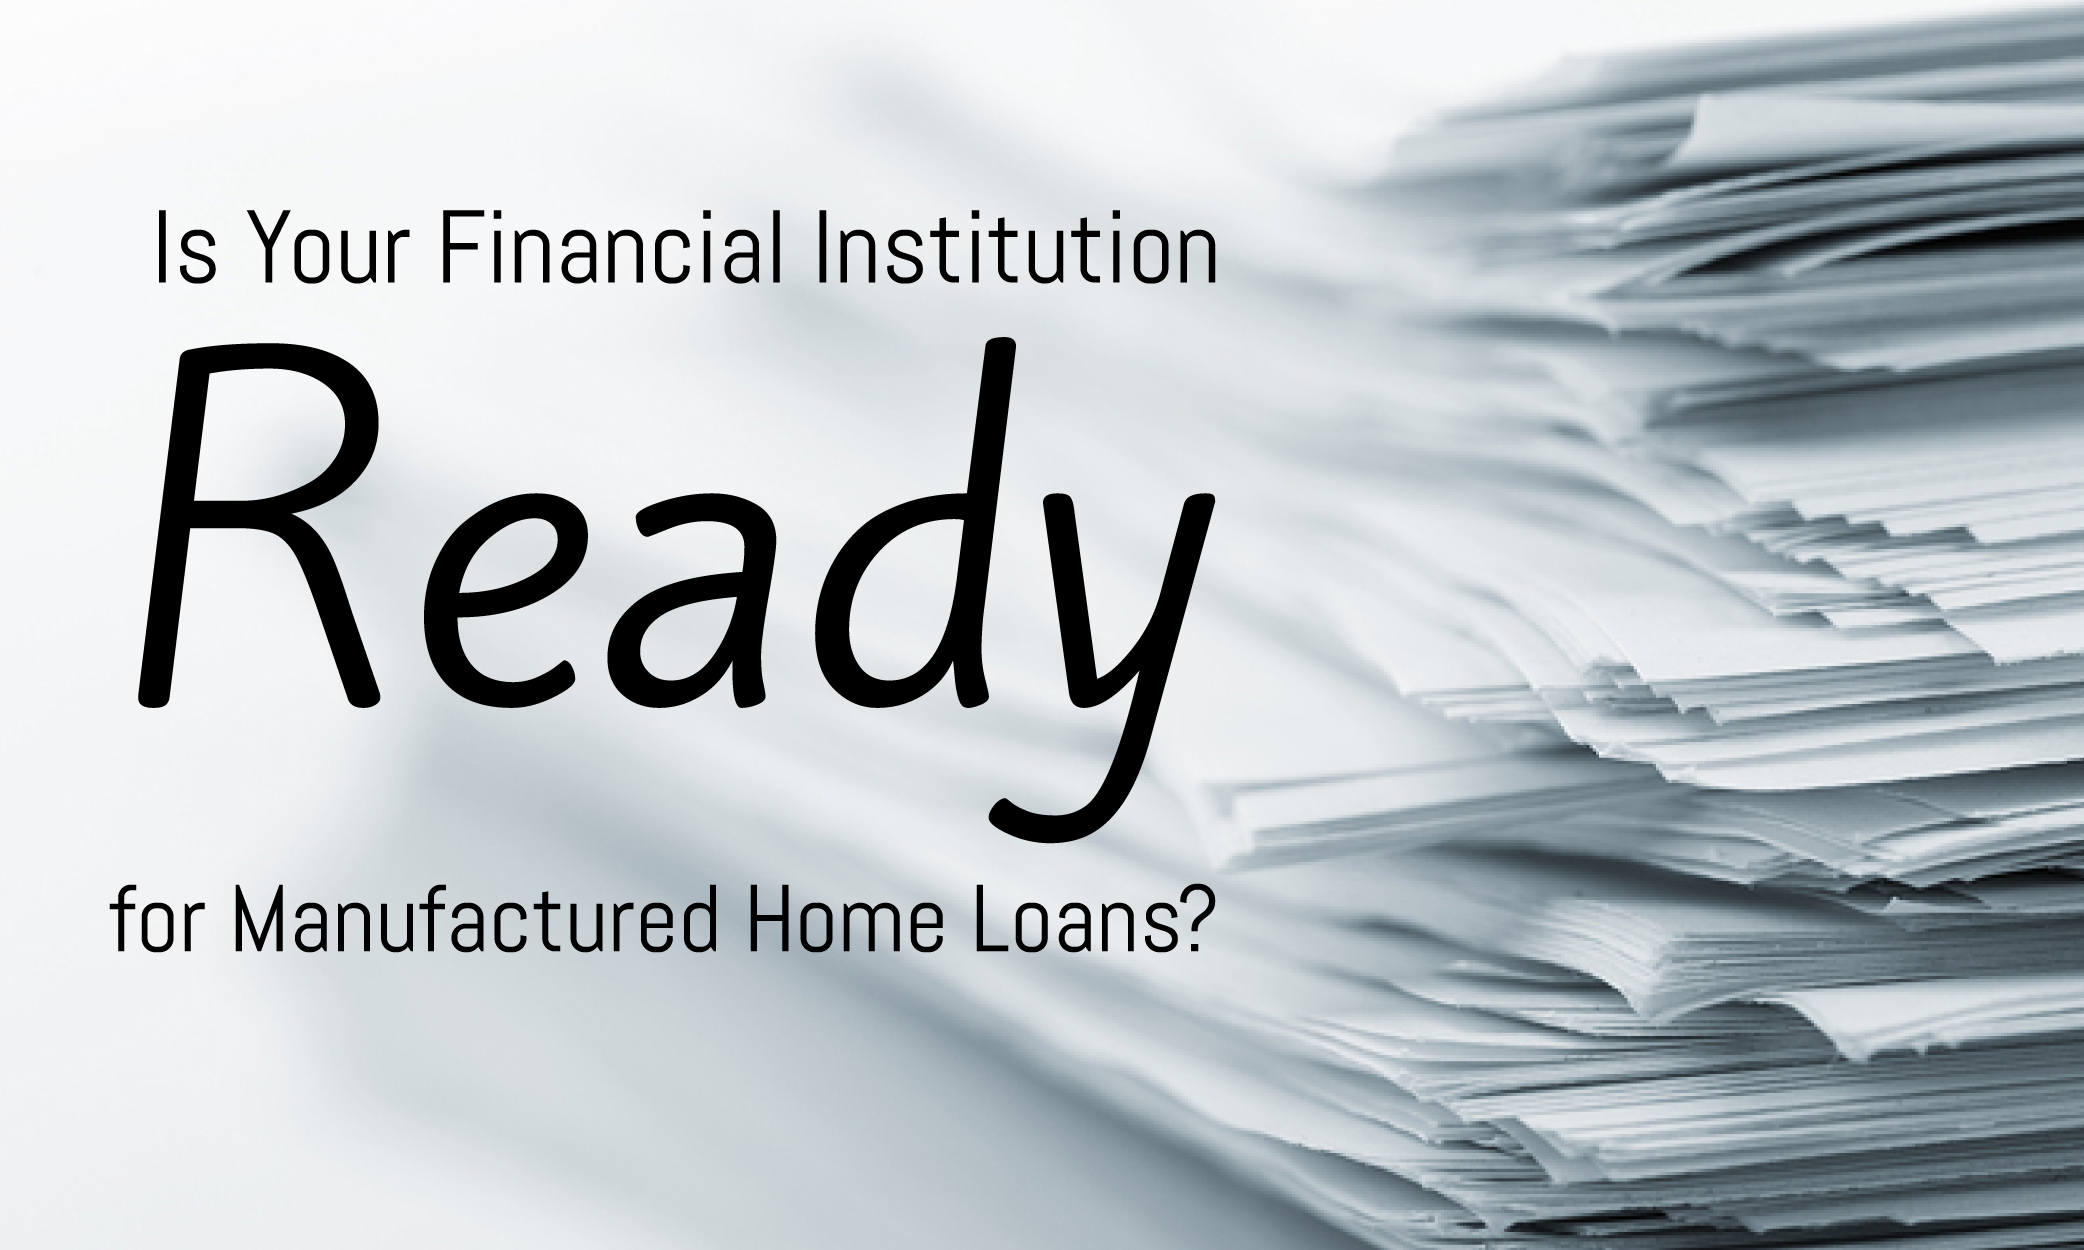 Is Your Financial Institution Ready for Manufactured Home Loans- Indirect Lending Innovation